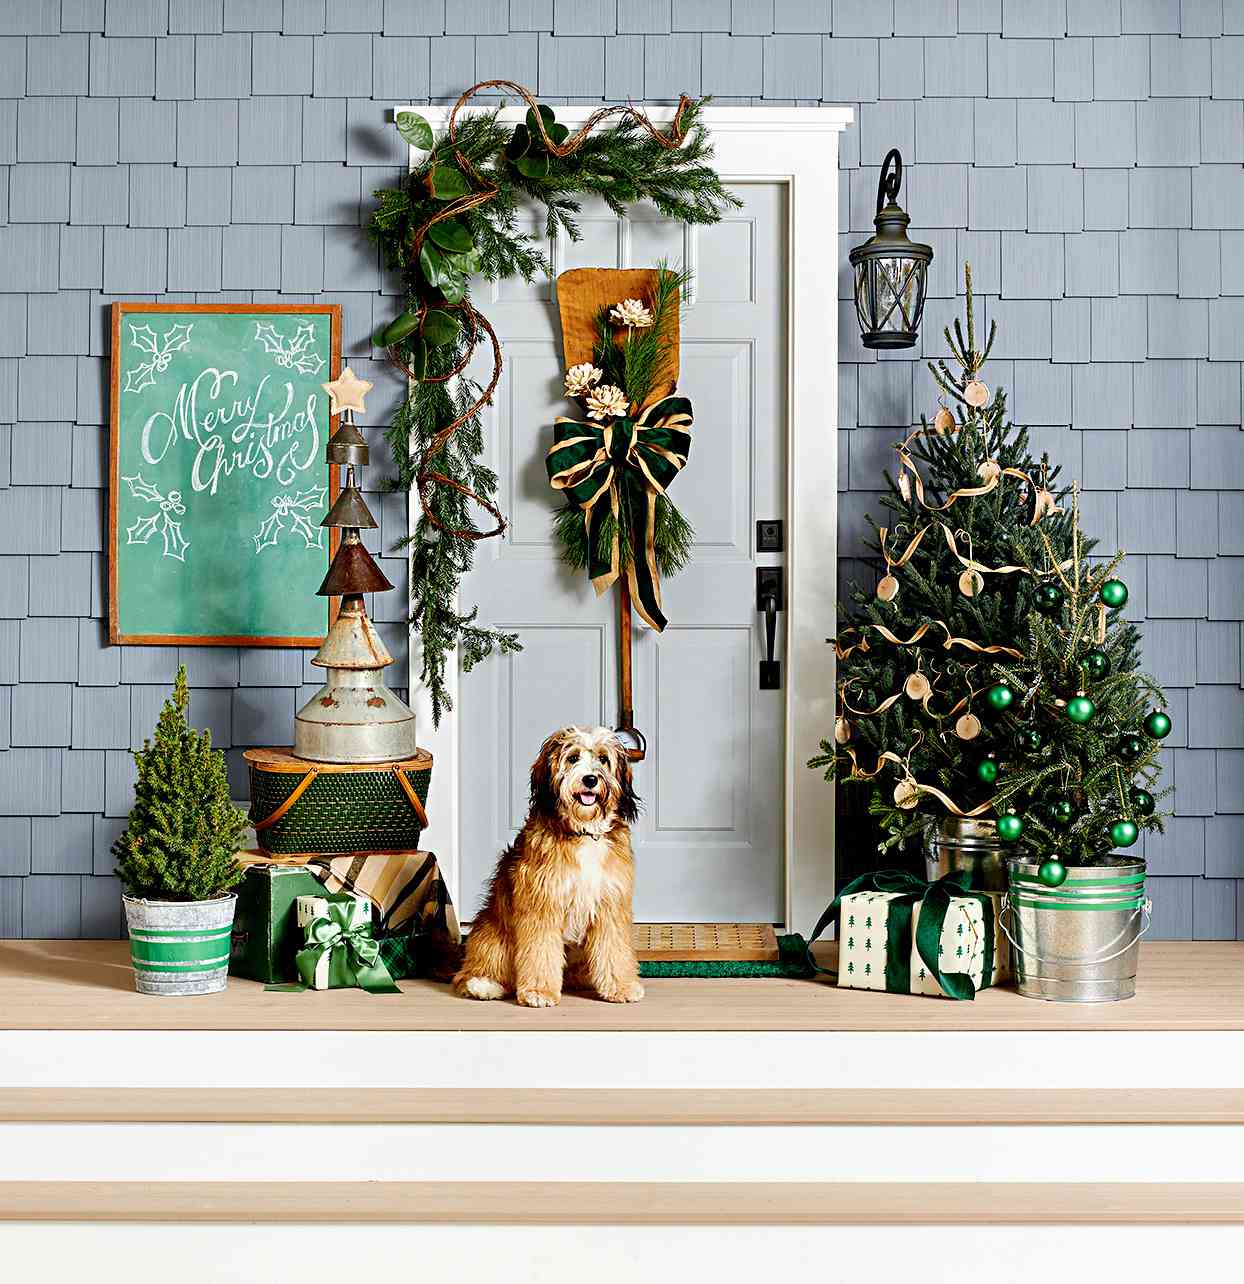 Festive front porch with Christmas tree, bow, and dog